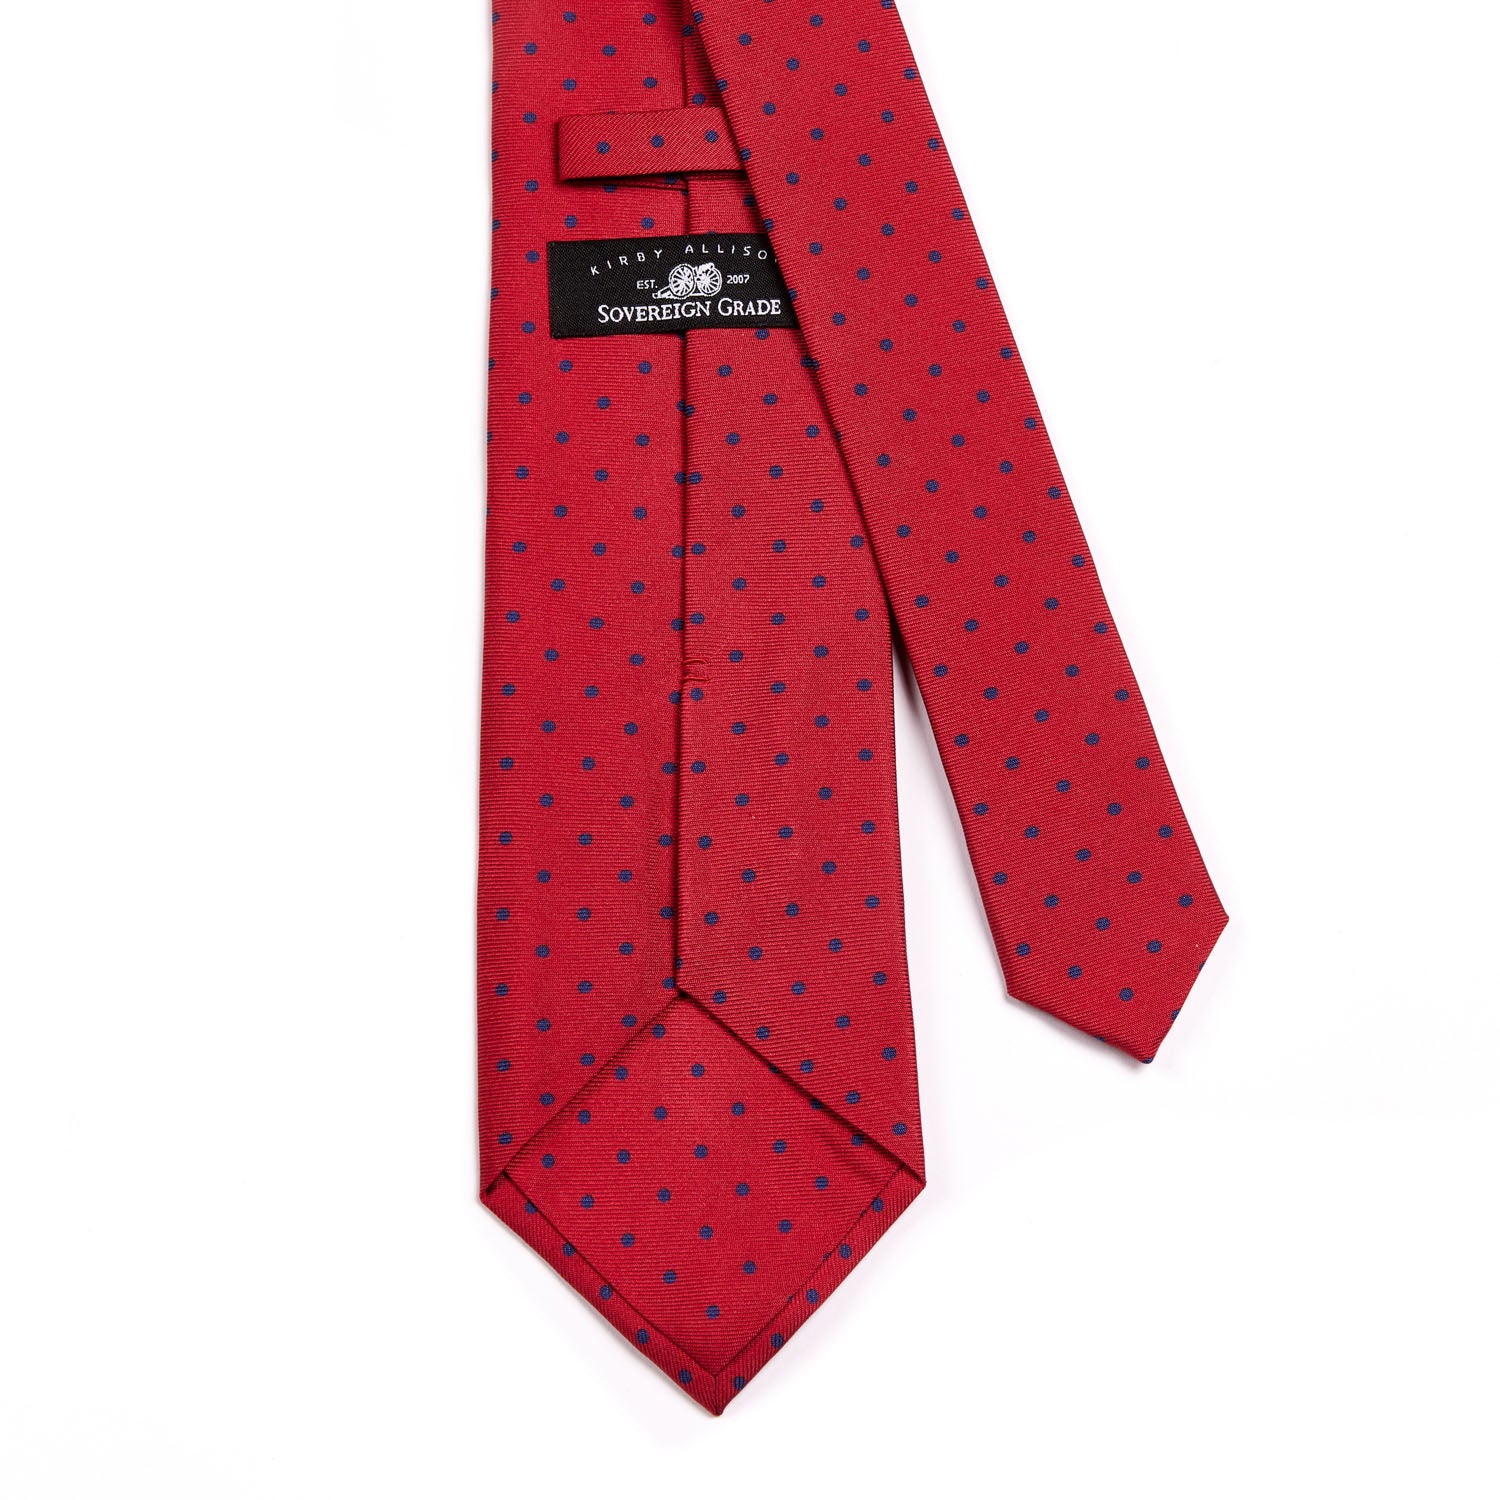 A Sovereign Grade Red London Dot Printed Silk Tie, 150cm handmade in the United Kingdom by KirbyAllison.com.